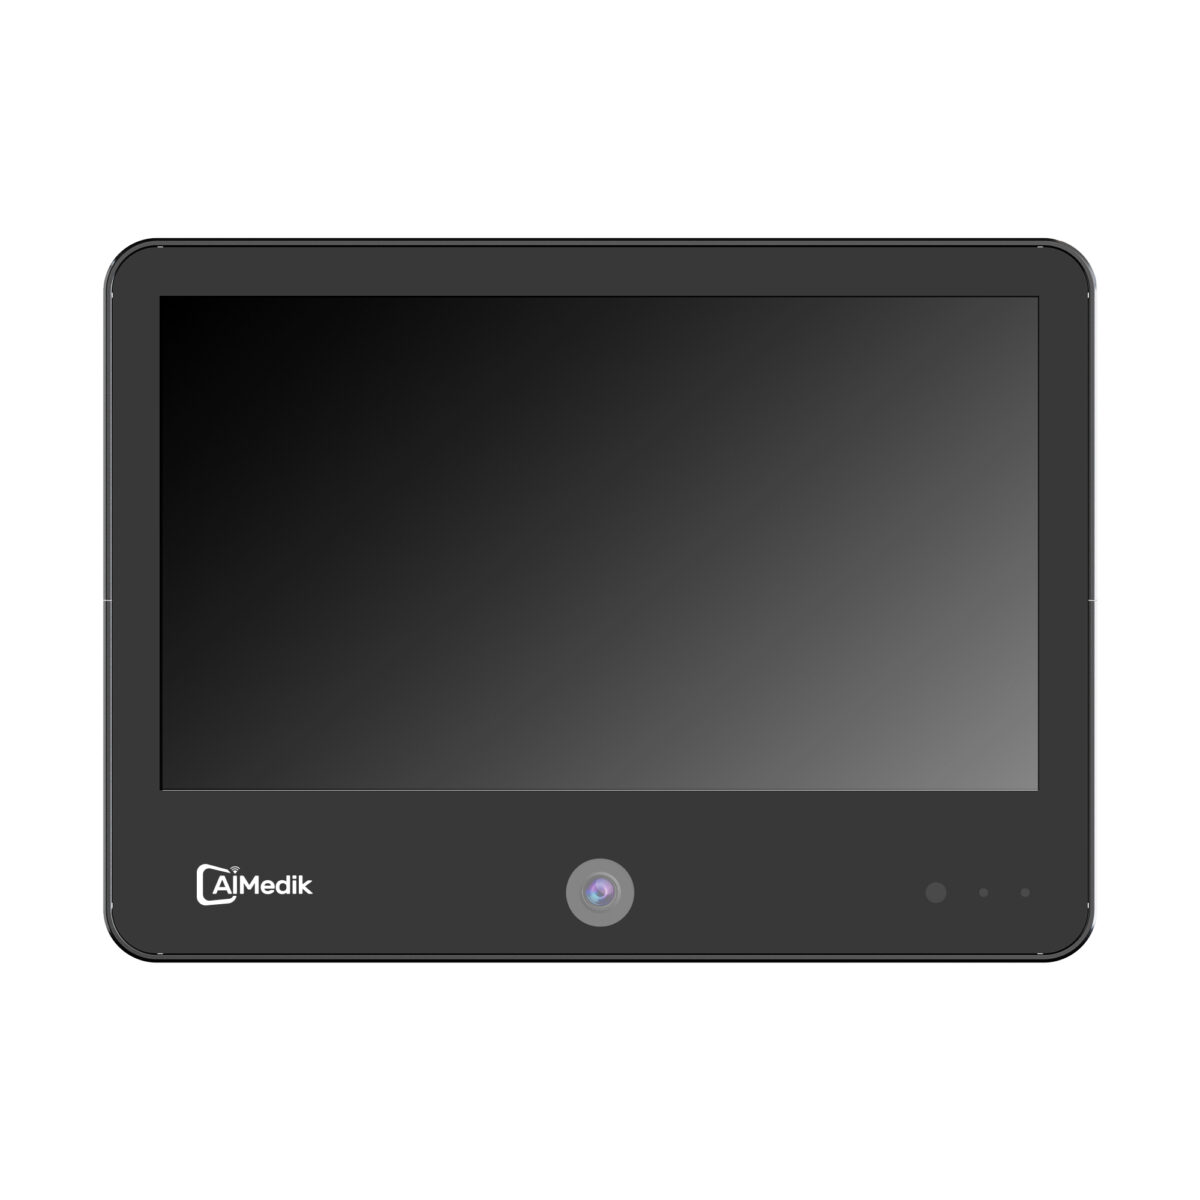 A black tablet with the logo "aimedik" on the bottom bezel, designed for surveillance video recording, and a central home button below the screen.